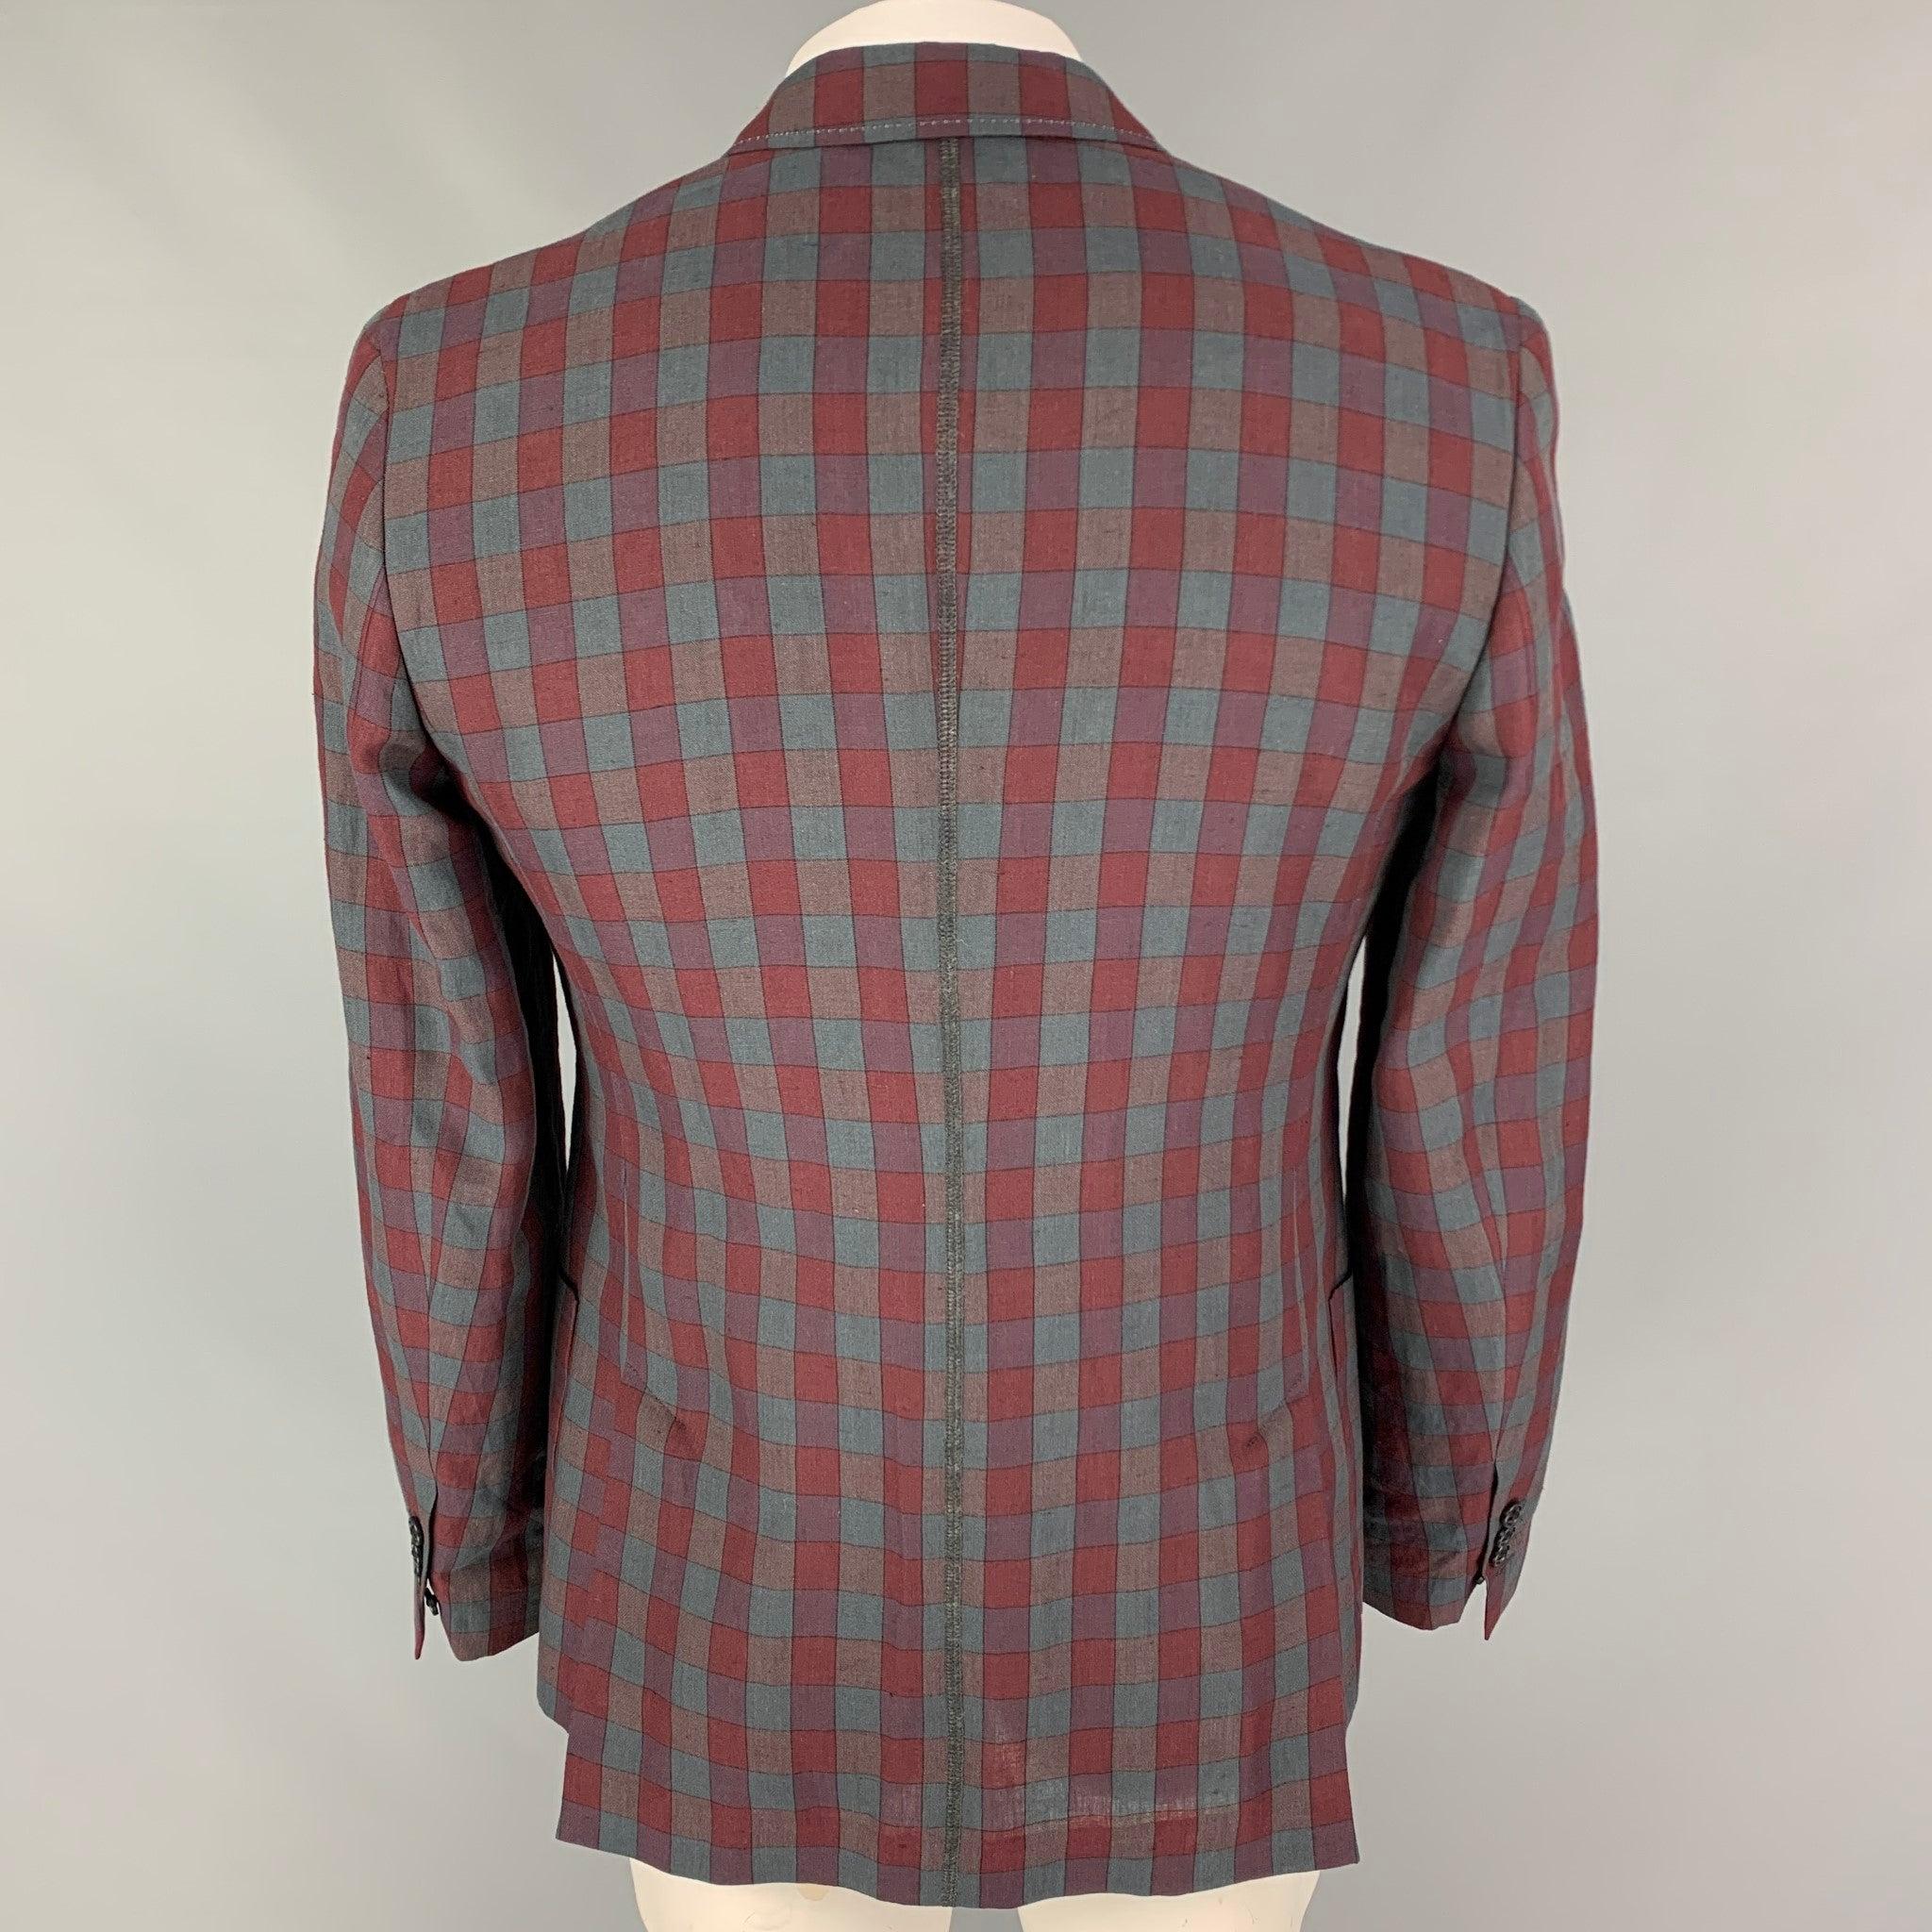 MARC JACOBS Size 42 Burgundy Grey Plaid Linen Notch Lapel Sport Coat In Good Condition For Sale In San Francisco, CA